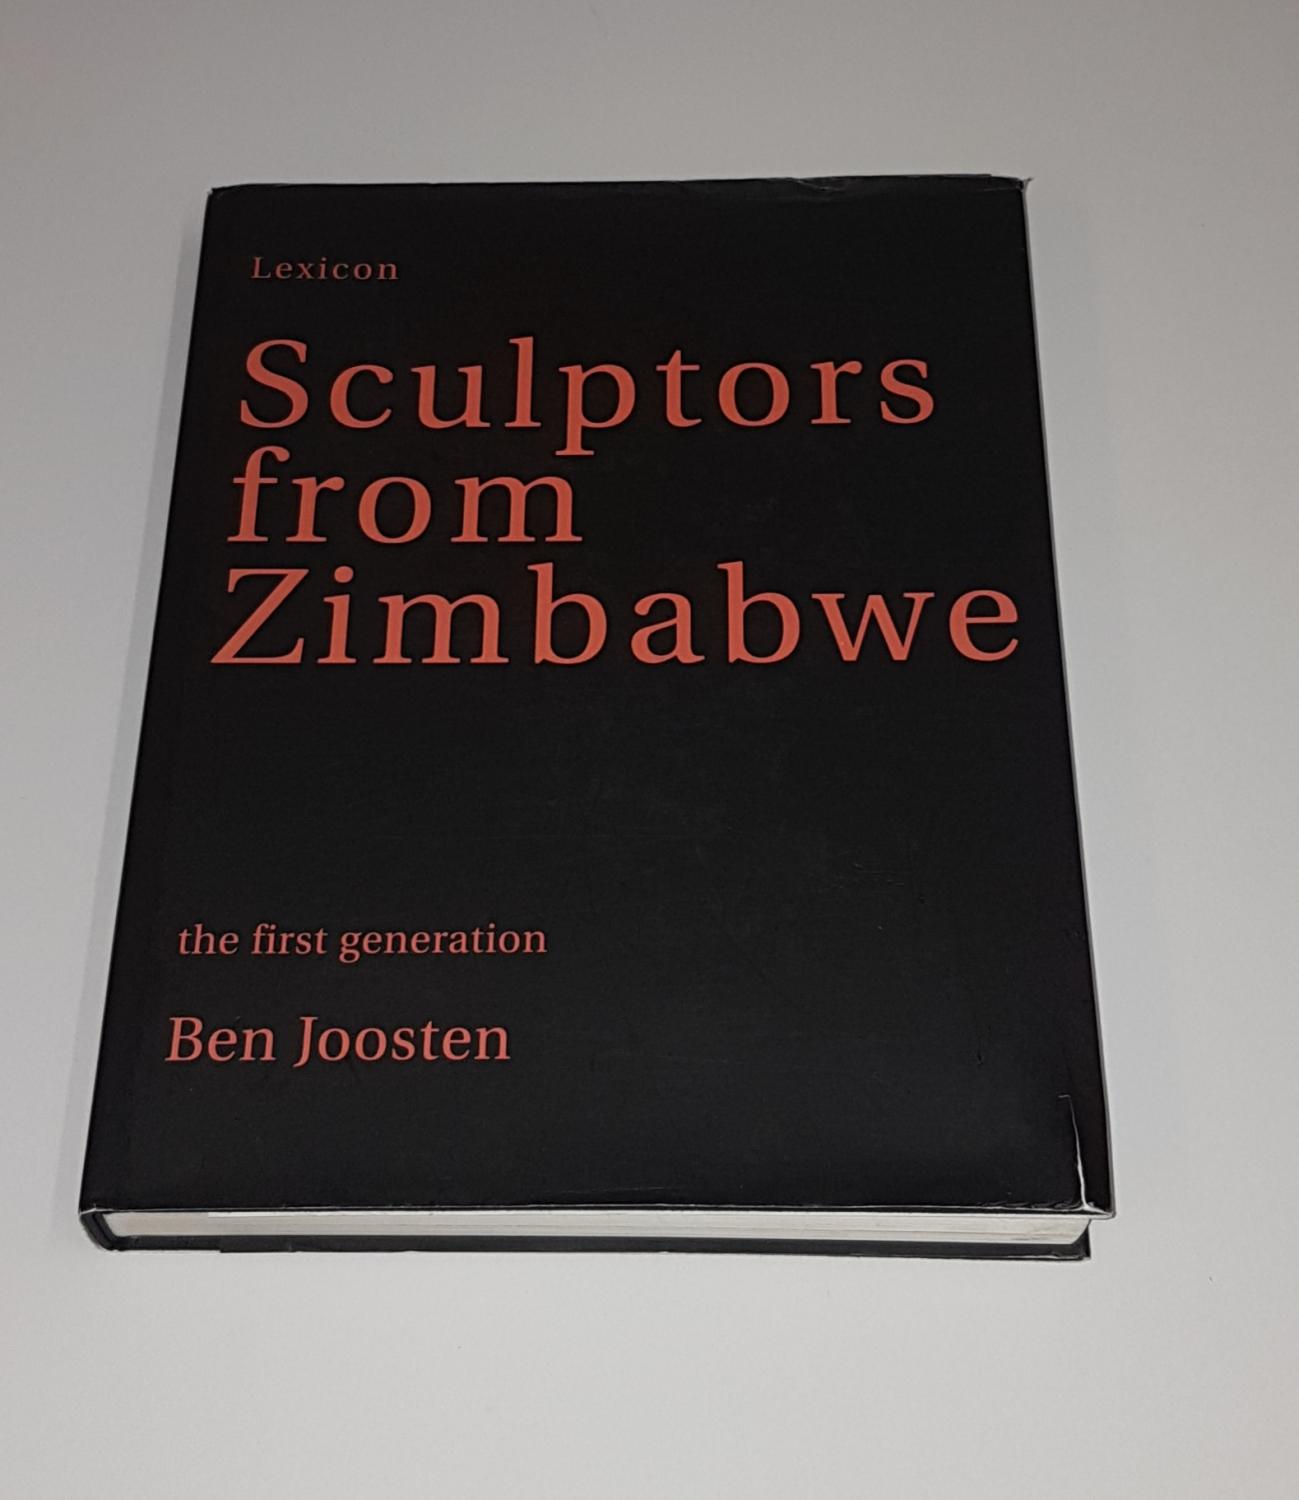 Lexicon: Sculptors from Zimbabwe - The First Generation - Jooston, Ben